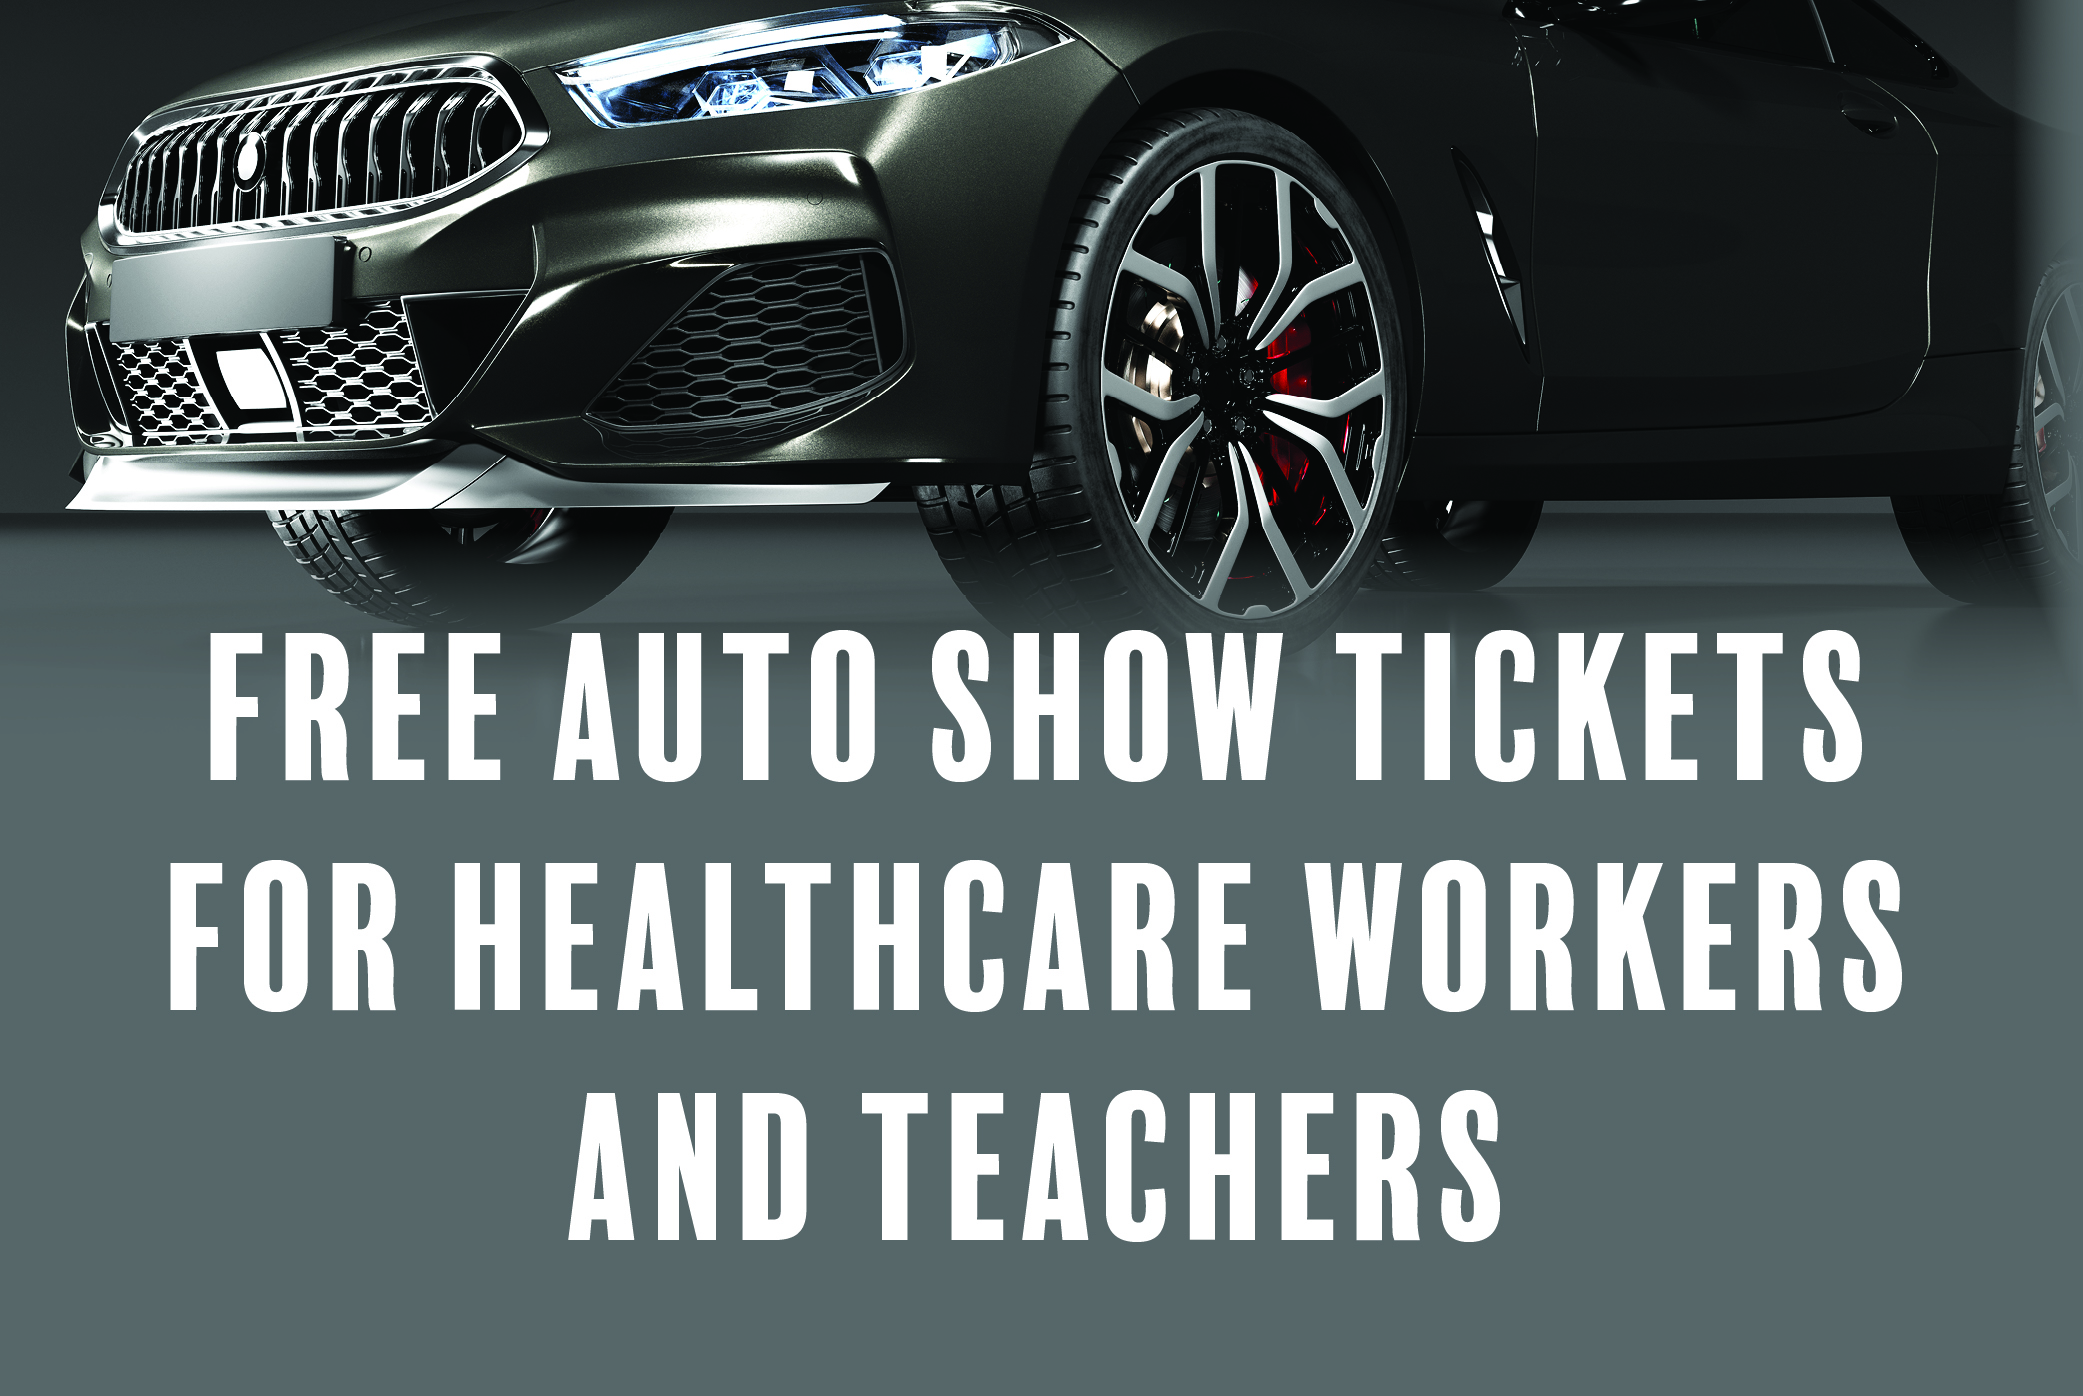 Two Free Auto Show Tickets for Healthcare Workers and Teachers